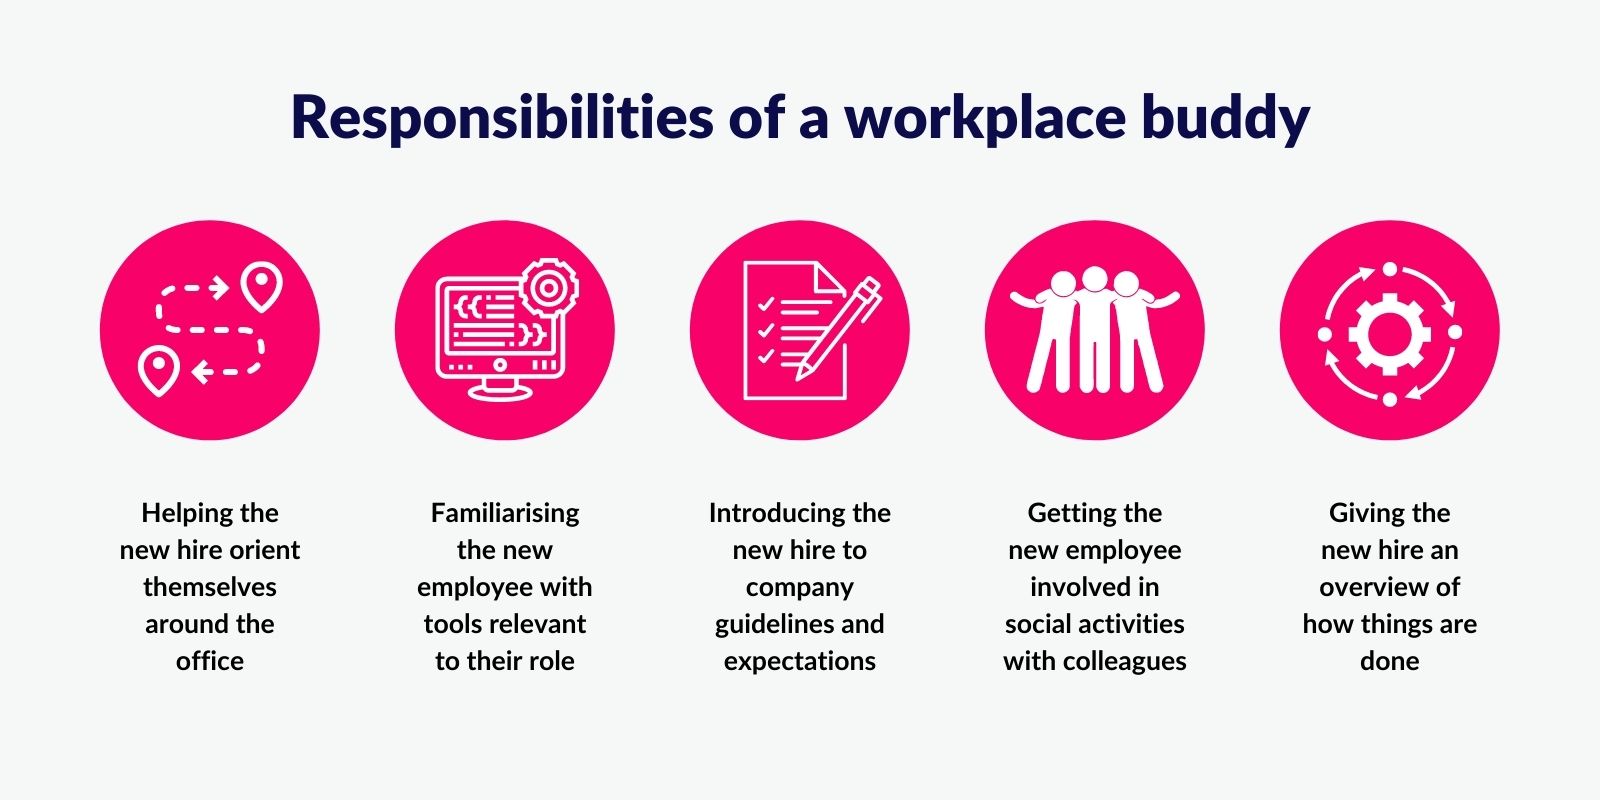 How to make a new employee feel welcome? 5 key responsibilities of a workplace buddy